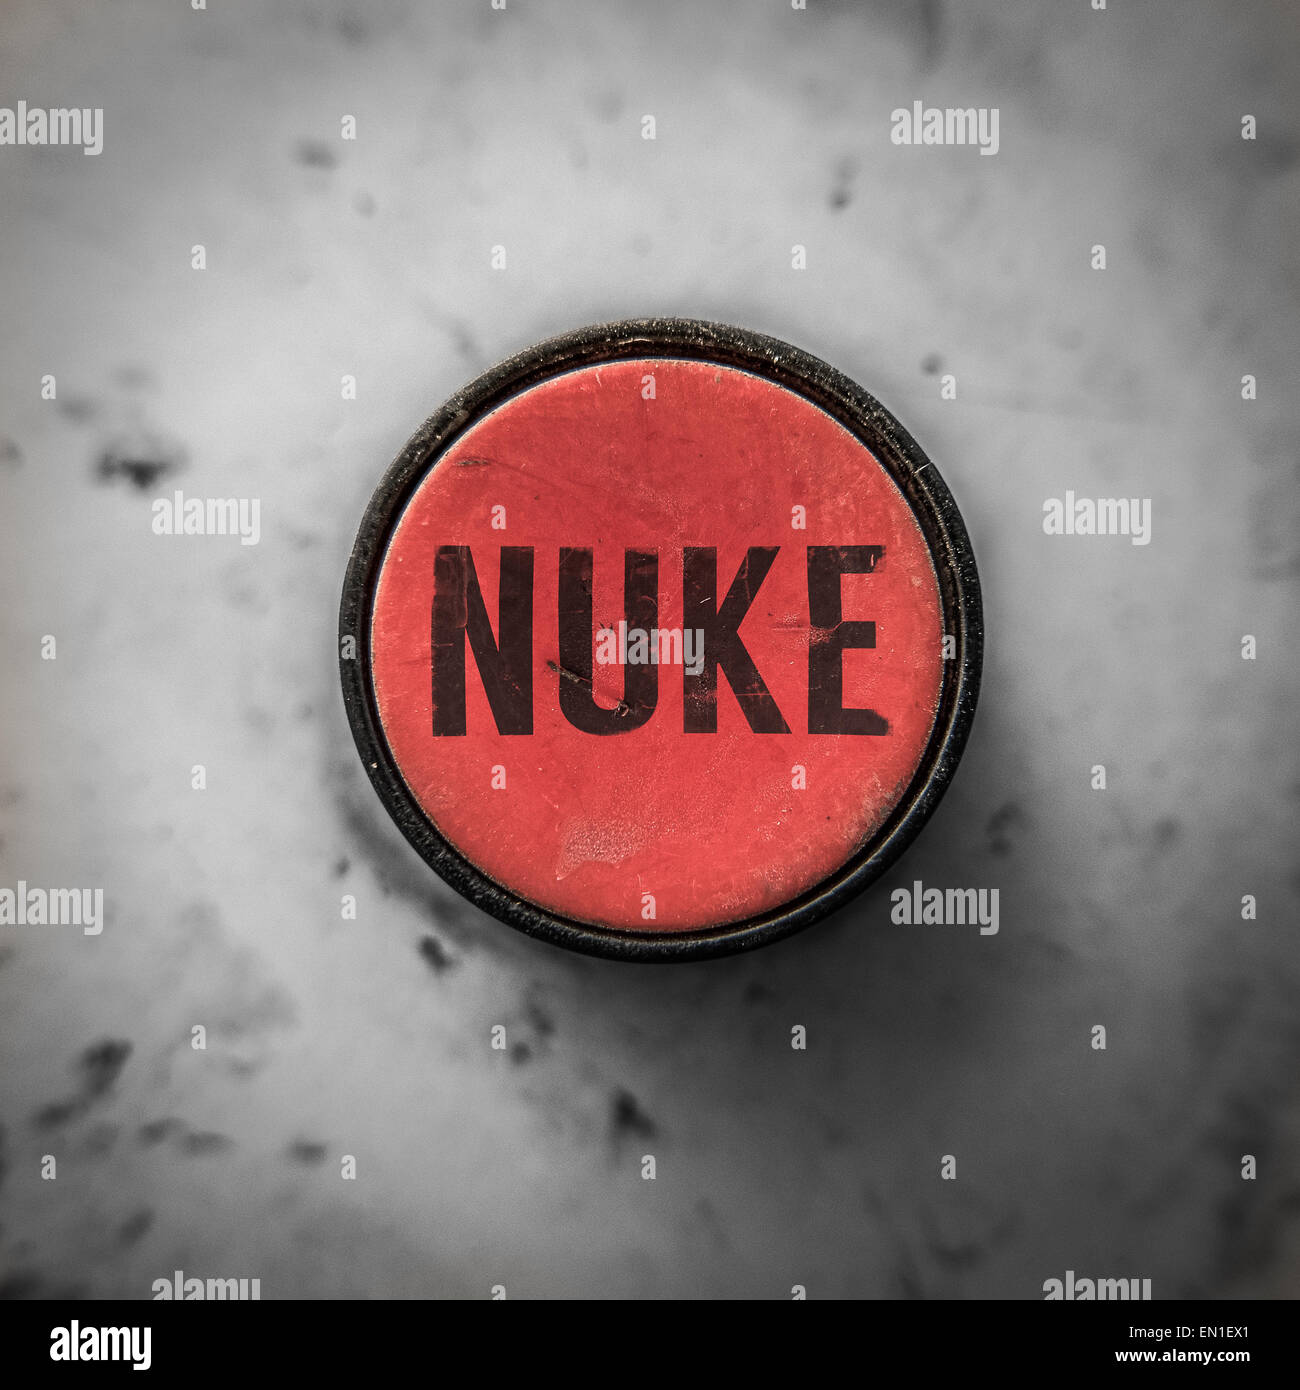 Grungy Industrial Style Button With Word Nuke Stock Photo